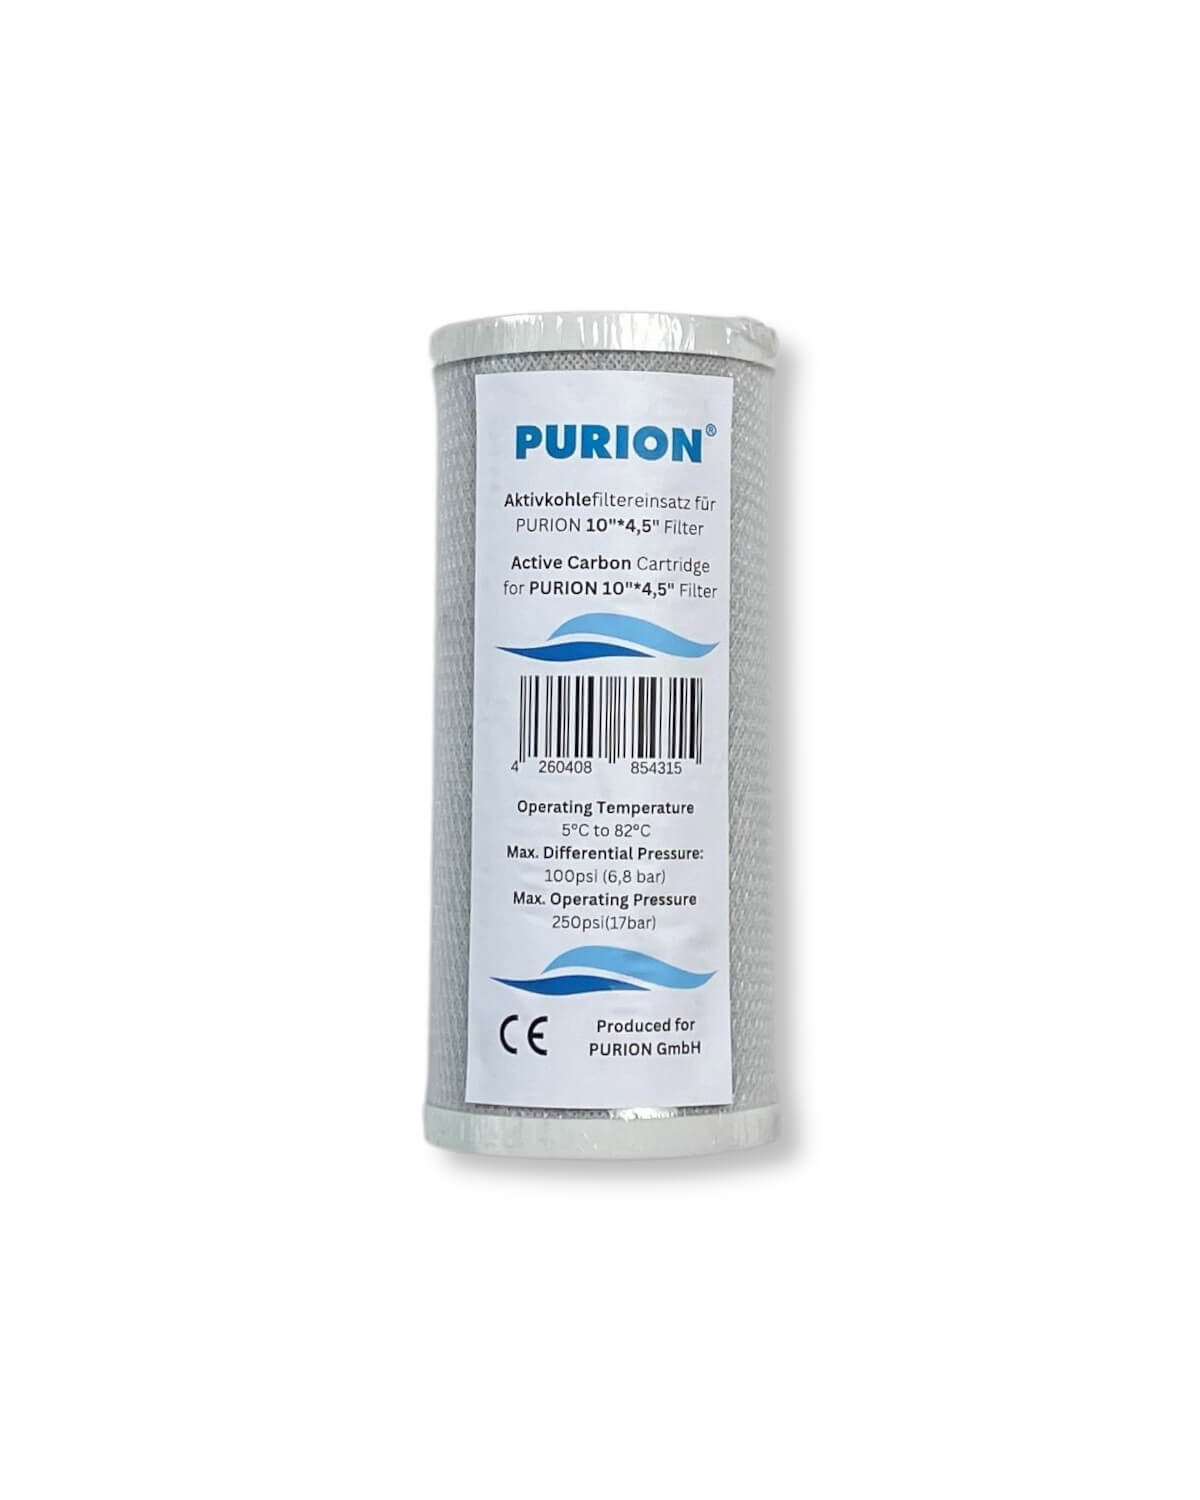 PURION filter cartridge Big Blue 10x4.5 inch activated carbon